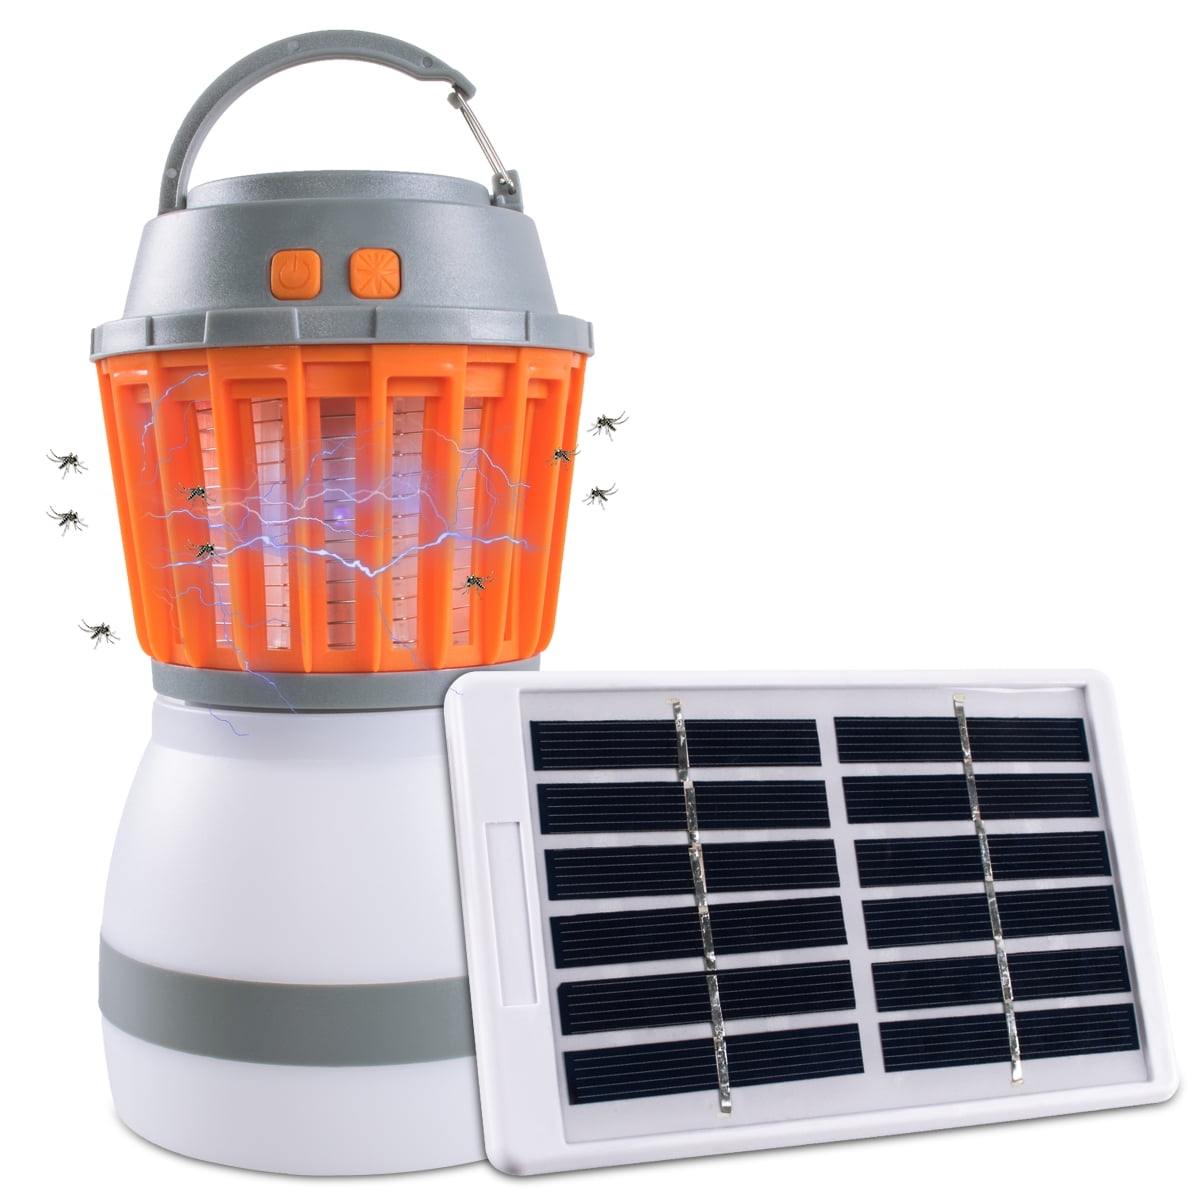 COKIT Bug Zapper LED Camping Lantern 2 in 1,Tripod Tent Light with Hook Portable Indoor Outdoor Mosquito Killer Fly Zappers Waterproof Compact UV Insect Trap Lamp 